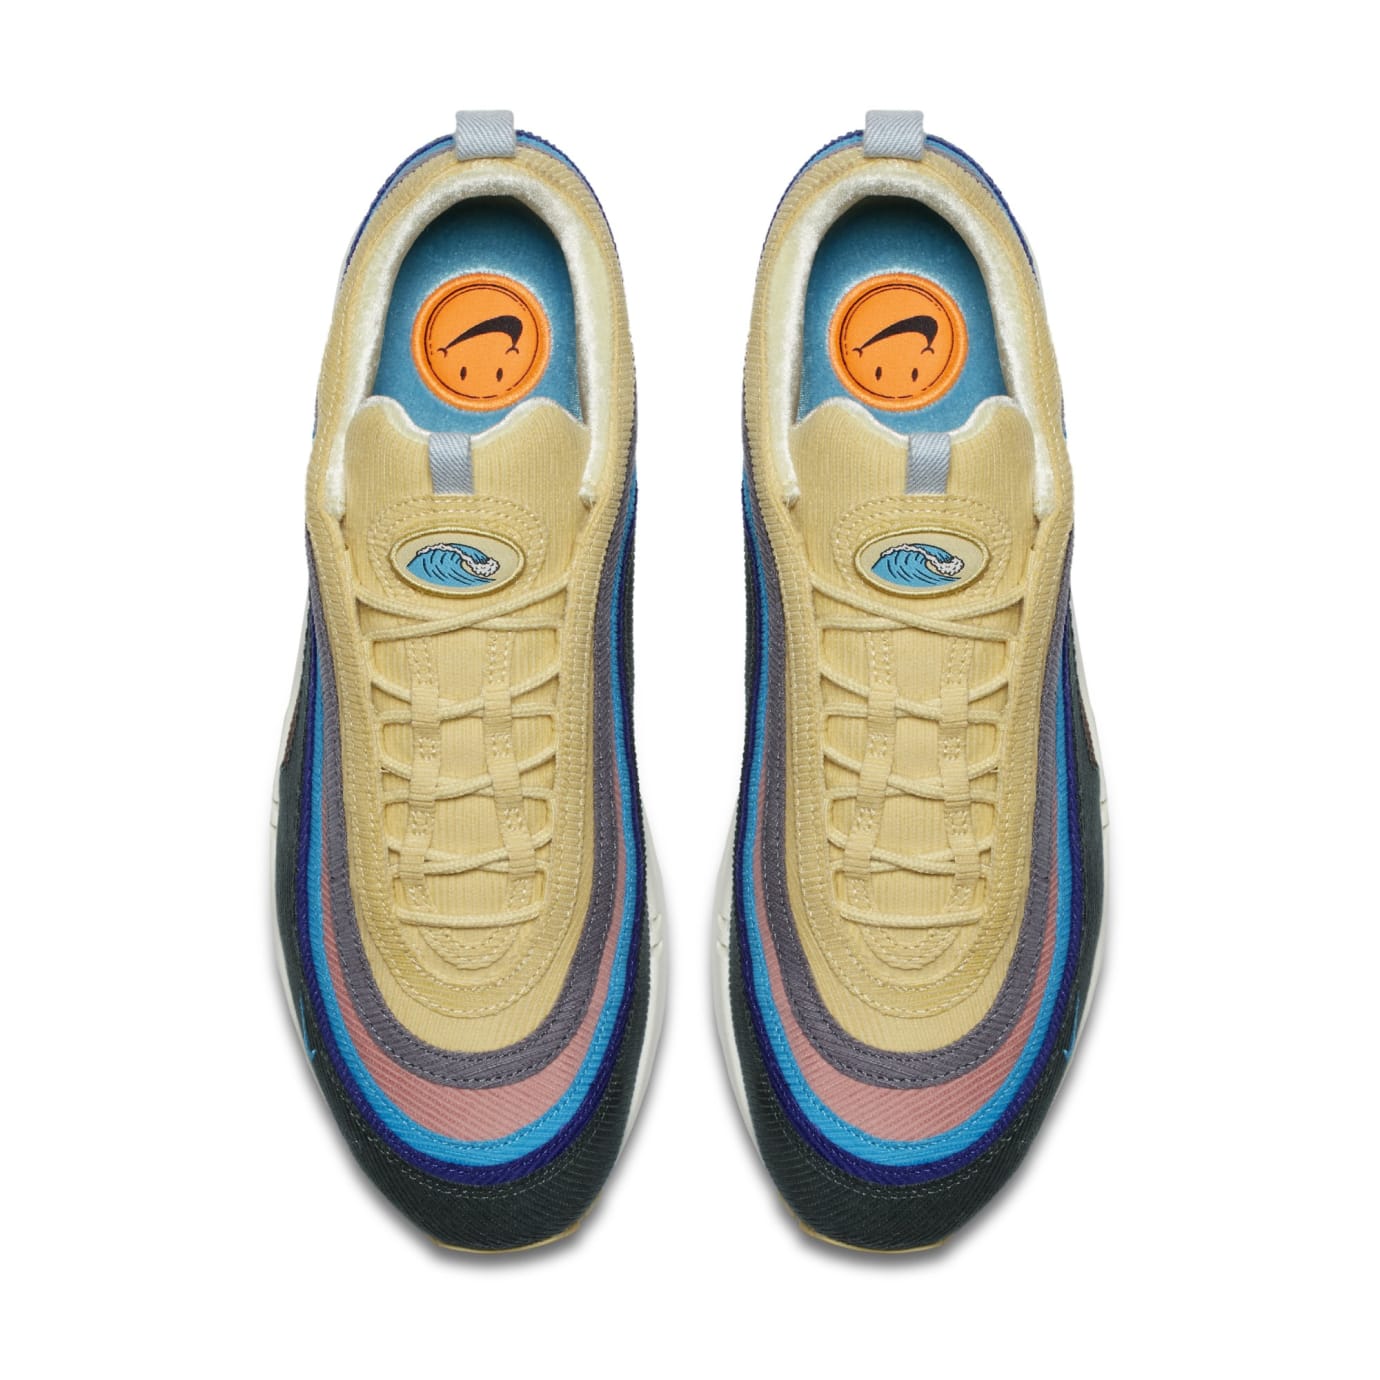 air max 97 1 sean wotherspoon vf sw